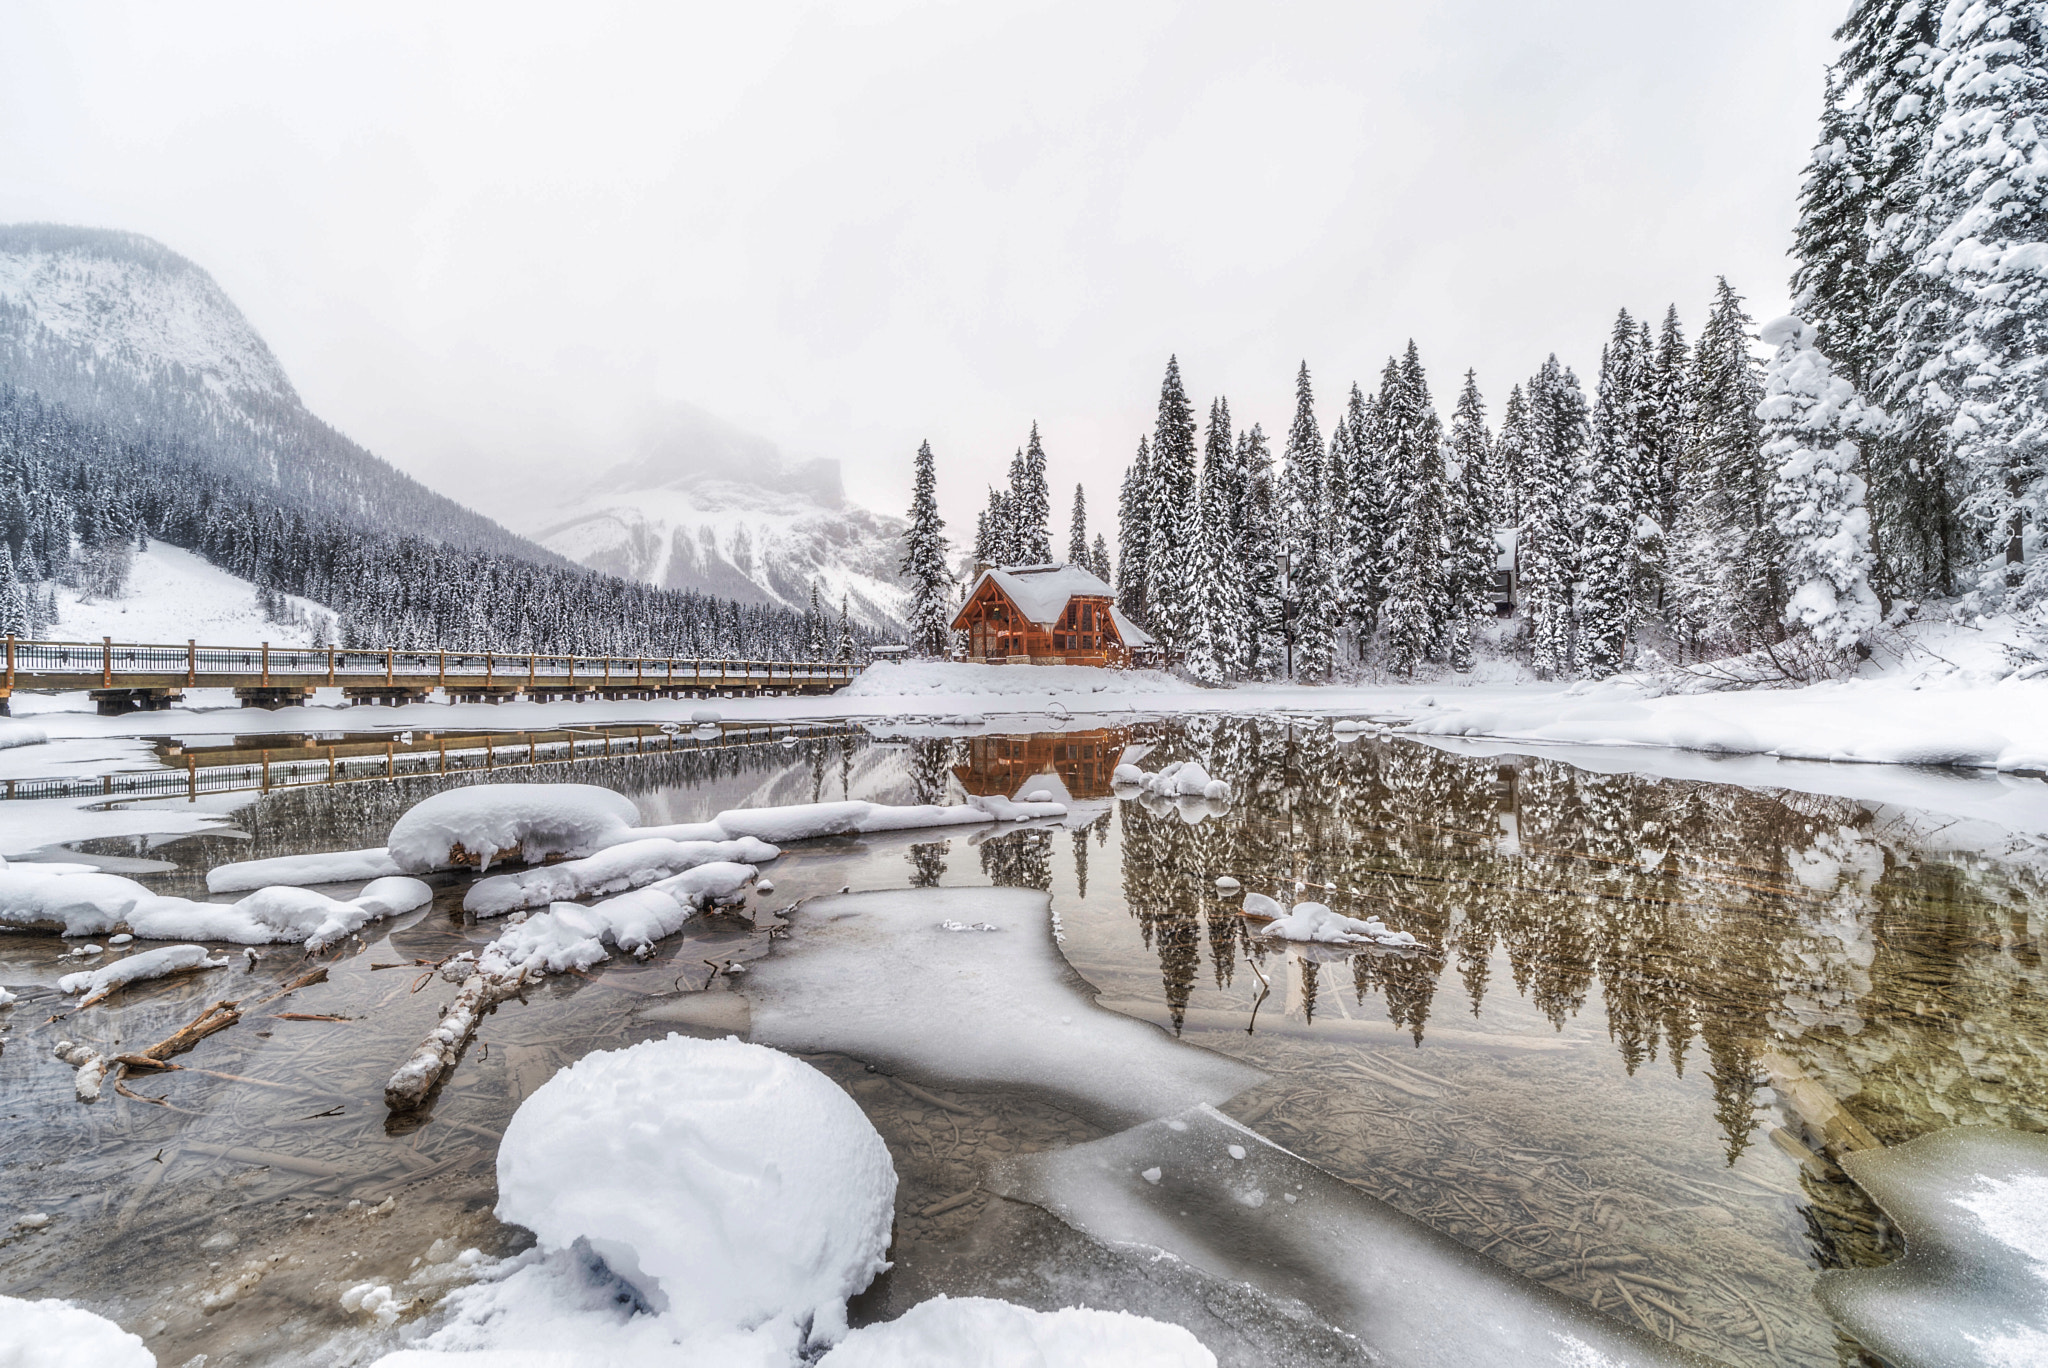 Nikon D610 sample photo. Winter days in yoho national park that saw snows , clearing conditions when i was by emerald lake photography